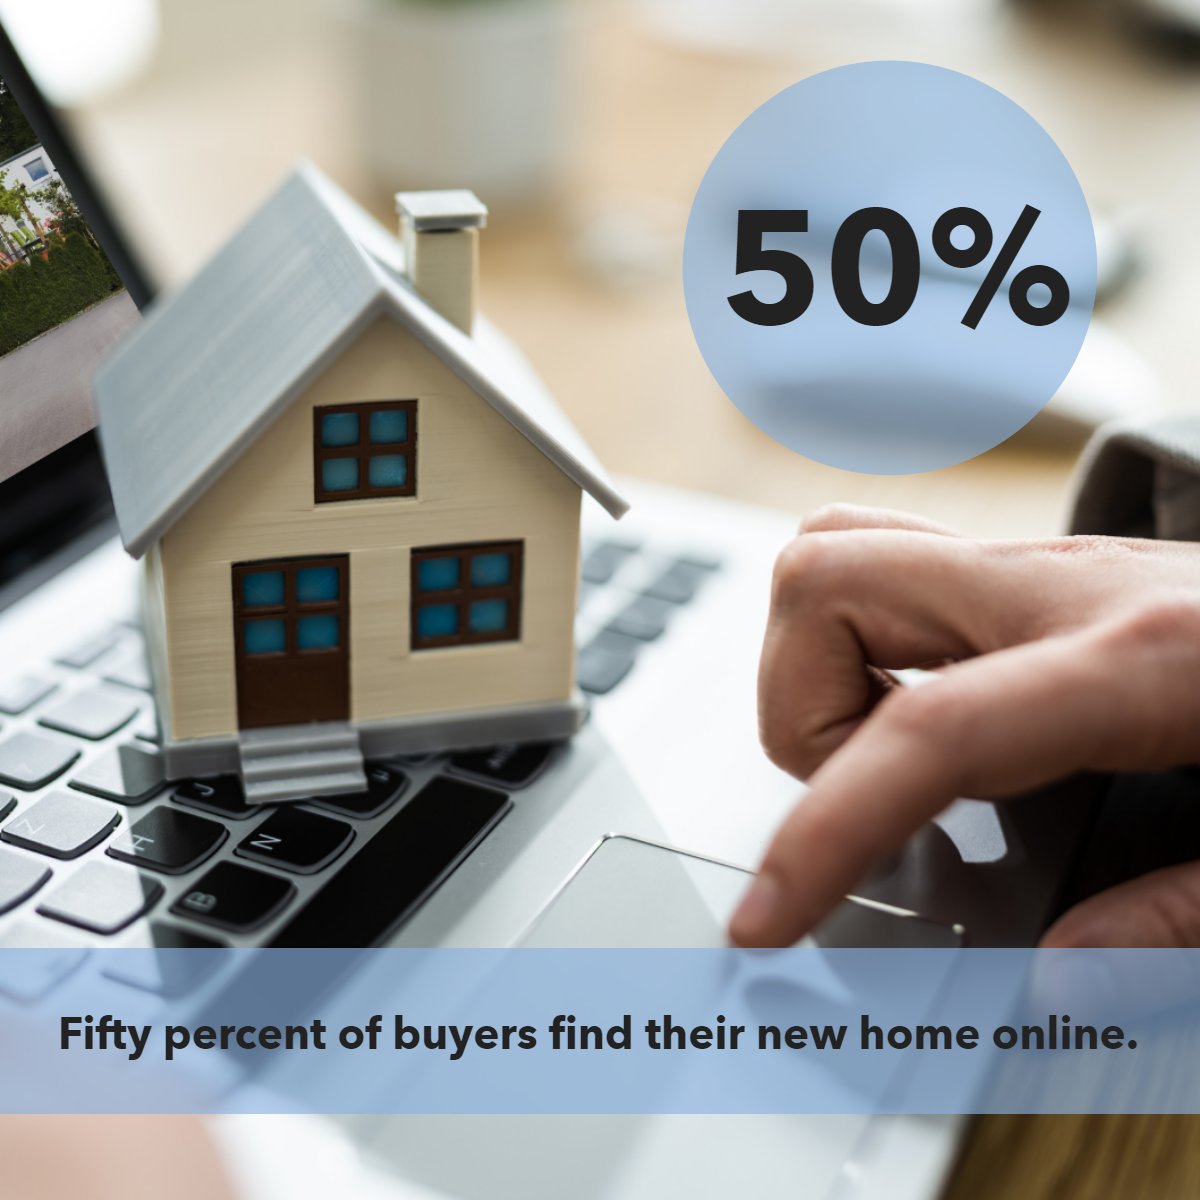 And I am pretty sure this number will only go up in the future! 📈

#funfacts     #online     #buyers     #buyingonline     #homesearch     #househunting
#knowthegame #IXLREALESTATE #SouthAlabamaHomeSearch